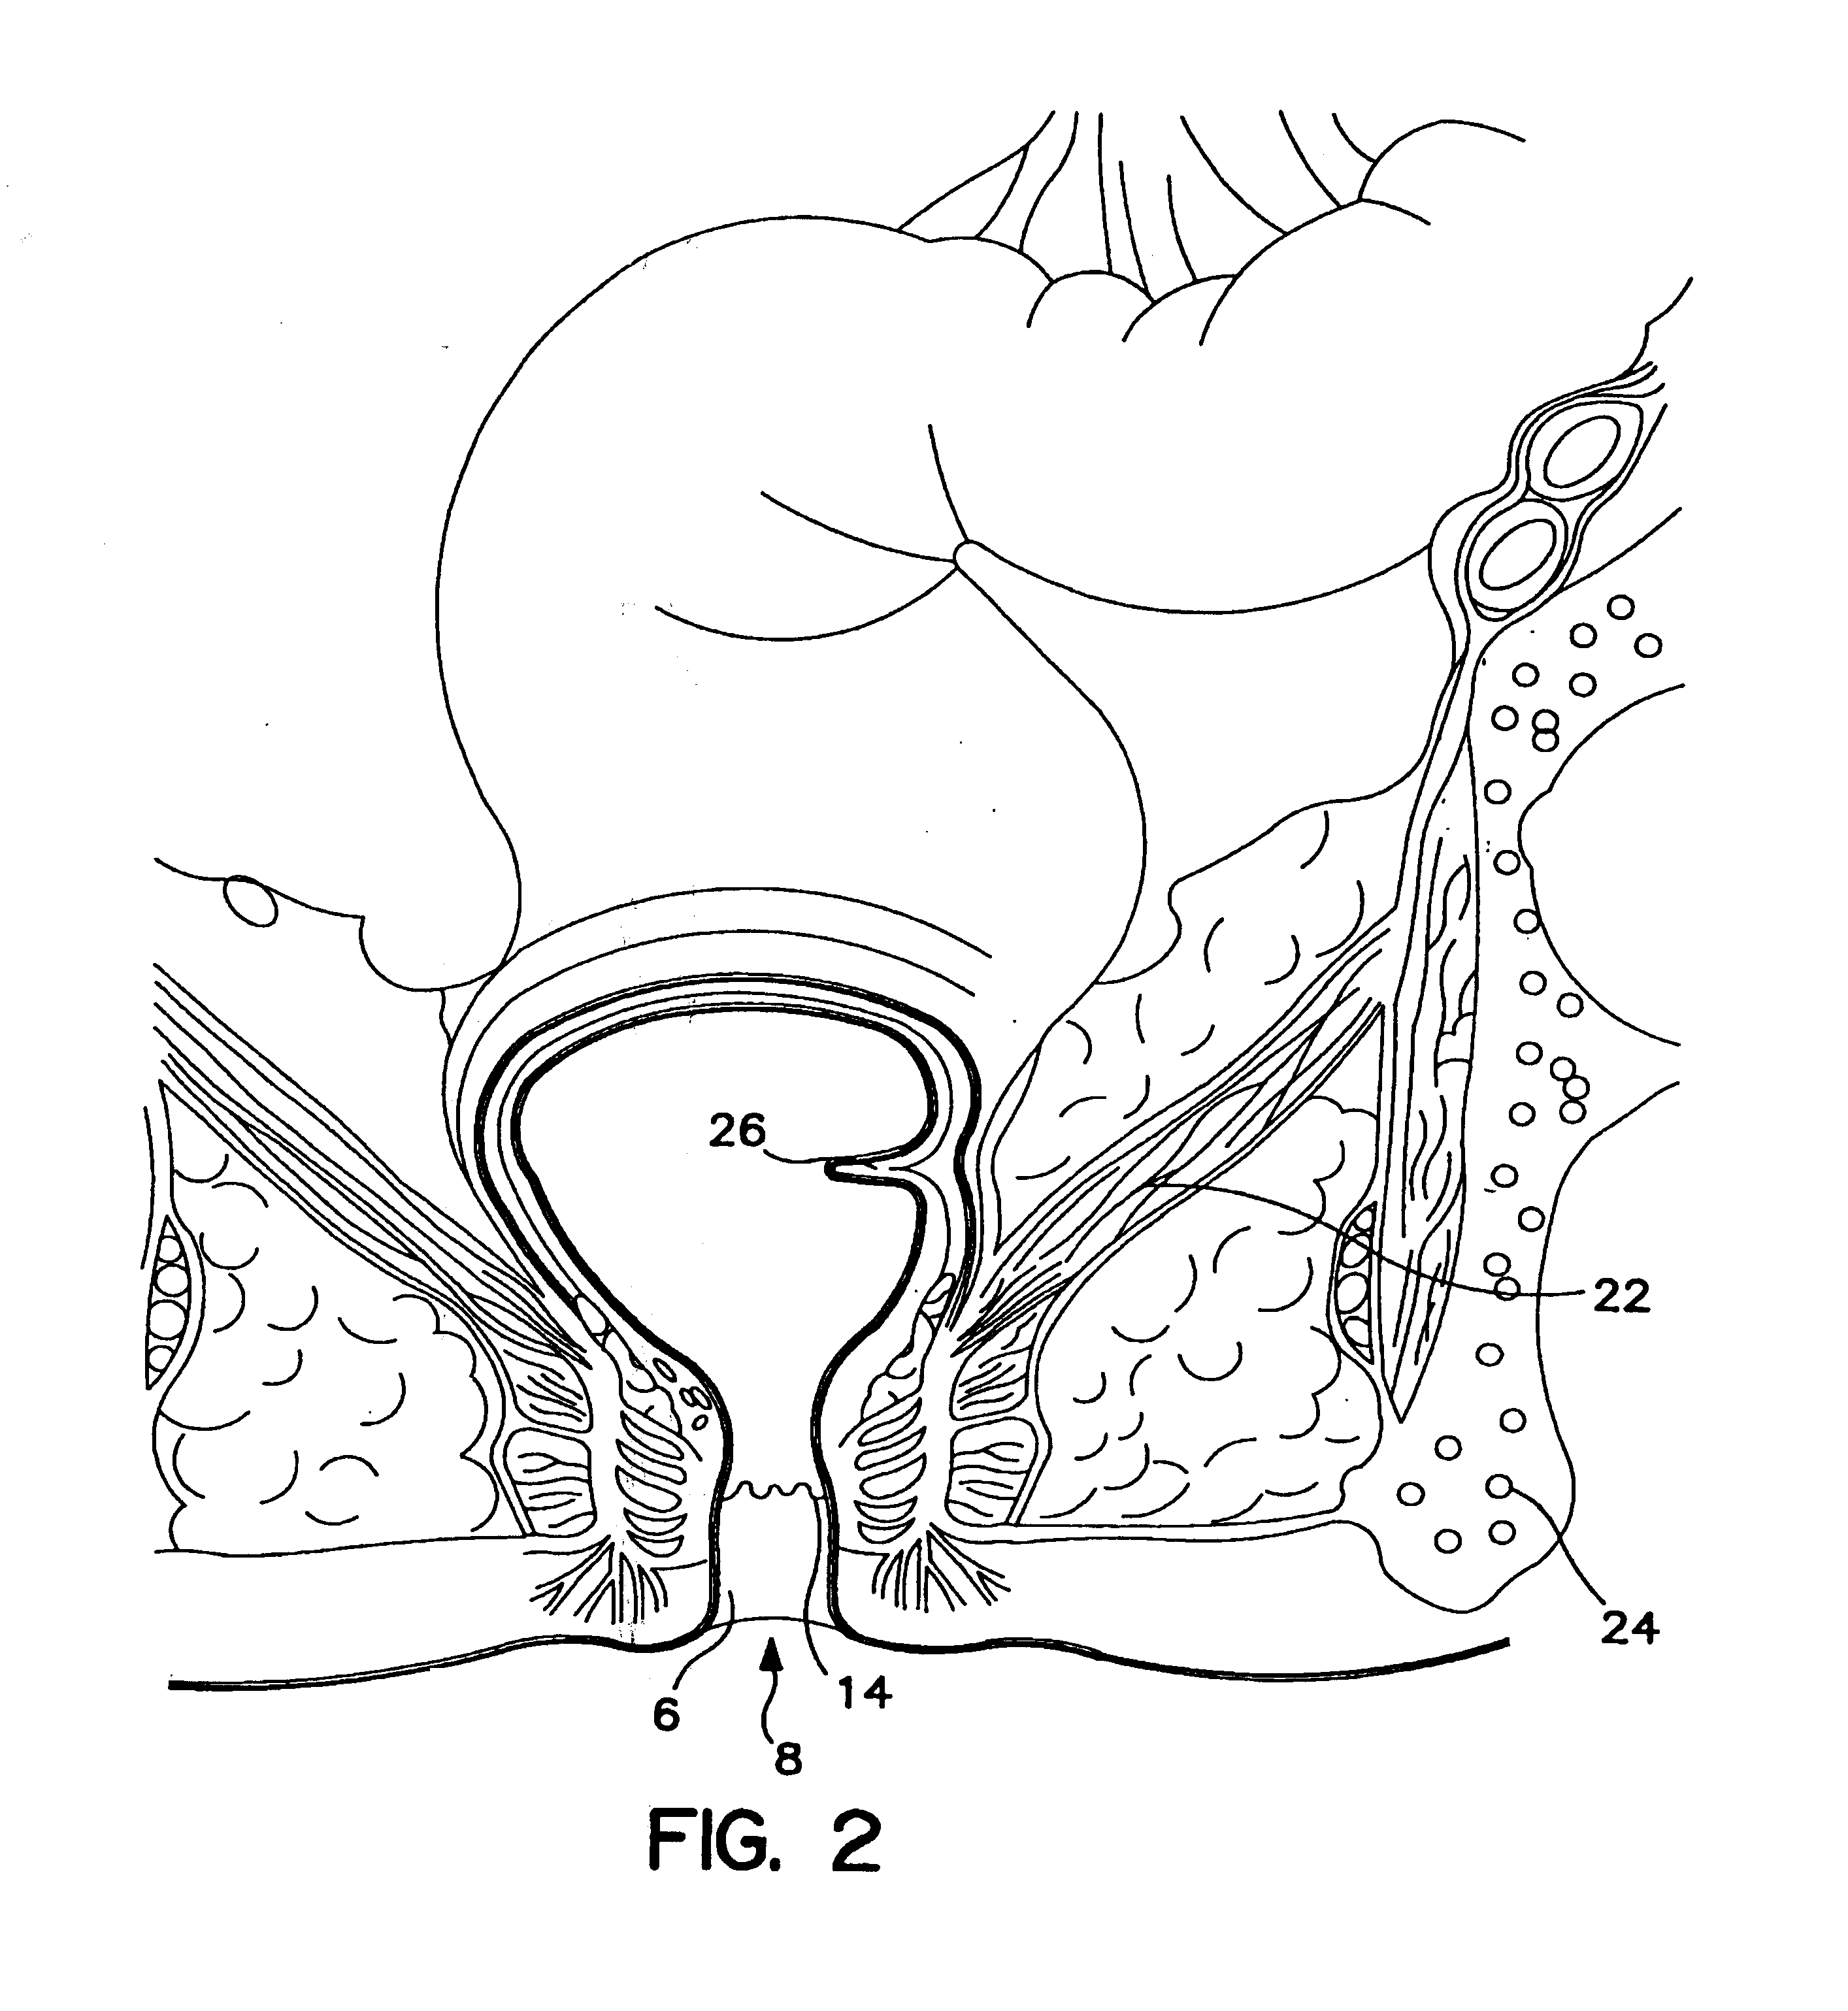 Method and apparatus for quantifying nerve and neural-muscular integrity related to pelvic organs or pelvic floor functions